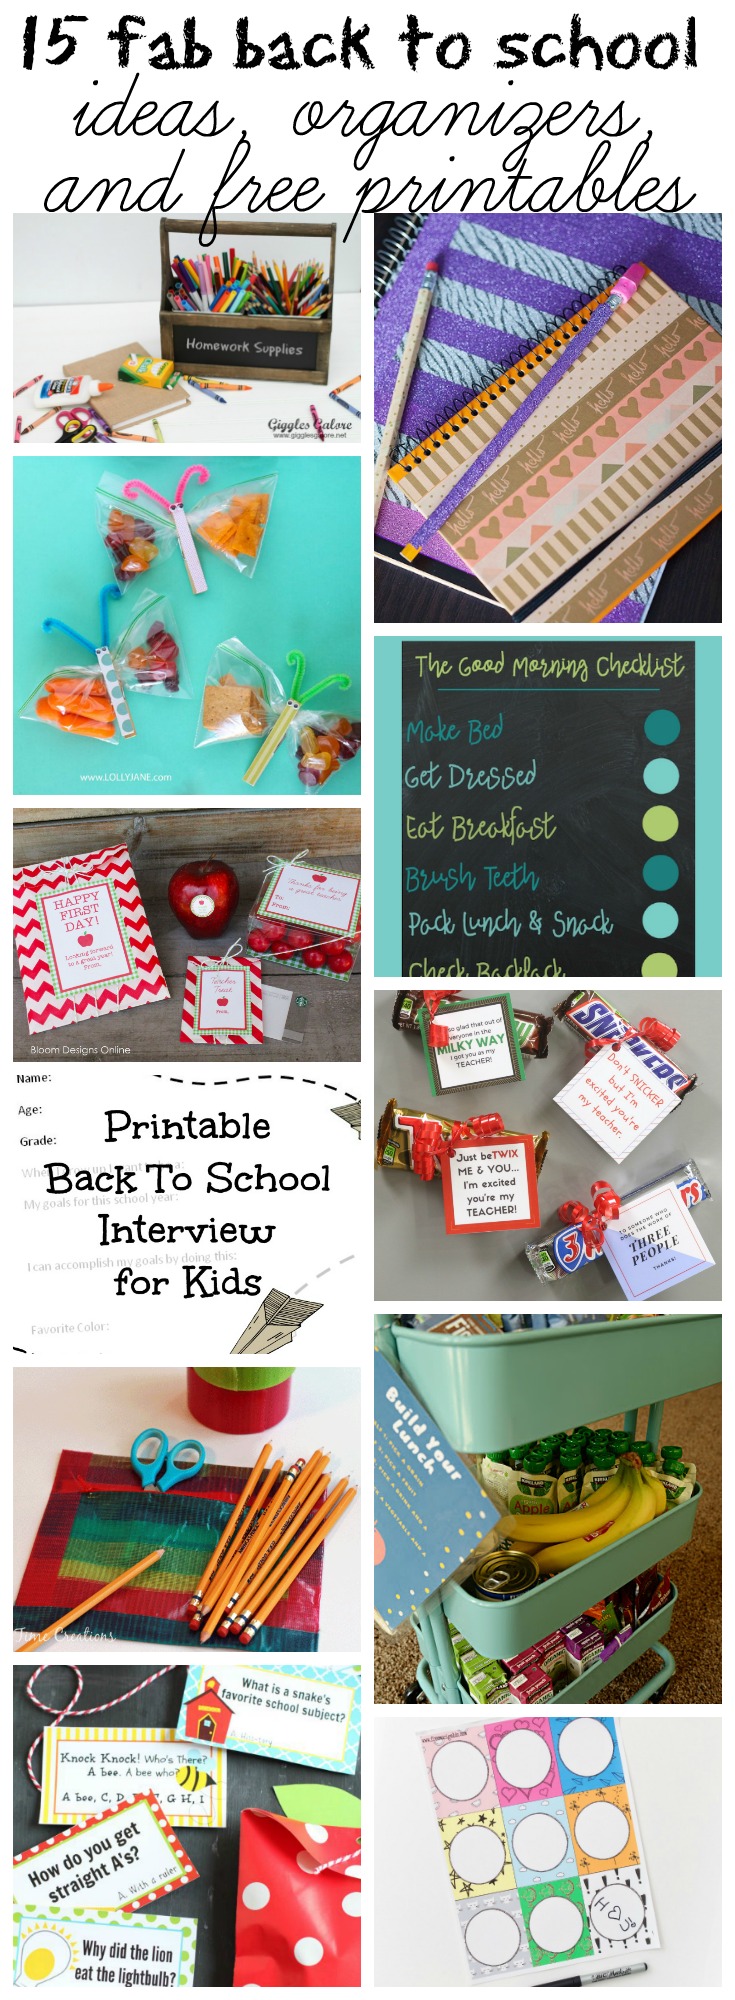 15 Fab Back to School Ideas, Projects, DIYS, Organizers, and Free Printables you don't want to miss